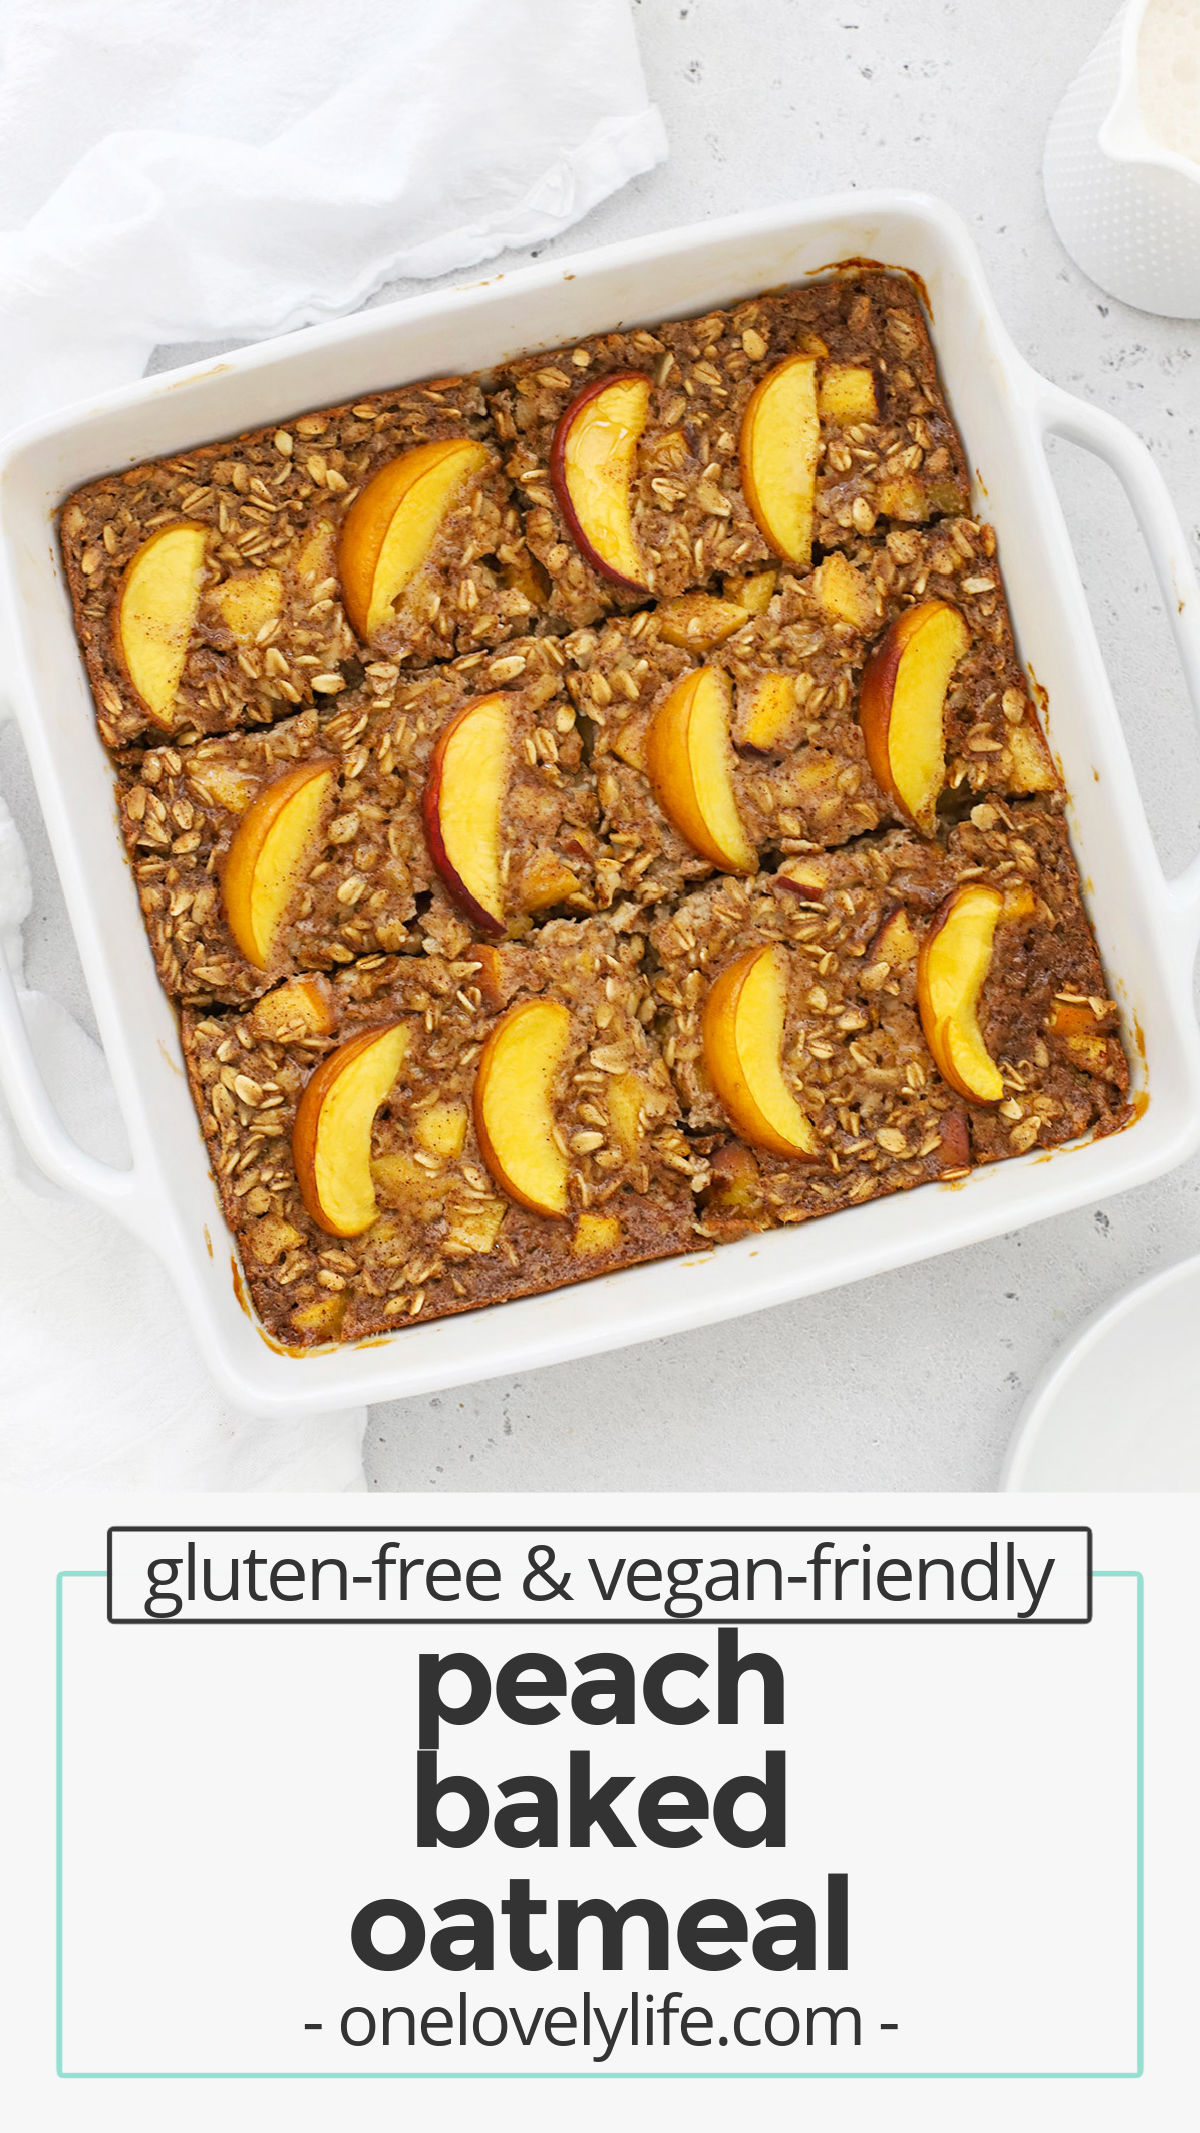 Peach Baked Oatmeal - Peach oatmeal made in the oven! This easy breakfast recipe is a lovely way to serve a crowd on a weekend and makes easy meal-prep breakfasts during the week. Don't miss all our toppings to try with it! (Gluten-Free, Vegan-Friendly) // peach oatmeal bake // peach oatmeal recipe // peach recipe // oatmeal // baked oatmeal // oatmeal bake // gluten free breakfast // meal prep breakfast // breakfast bake